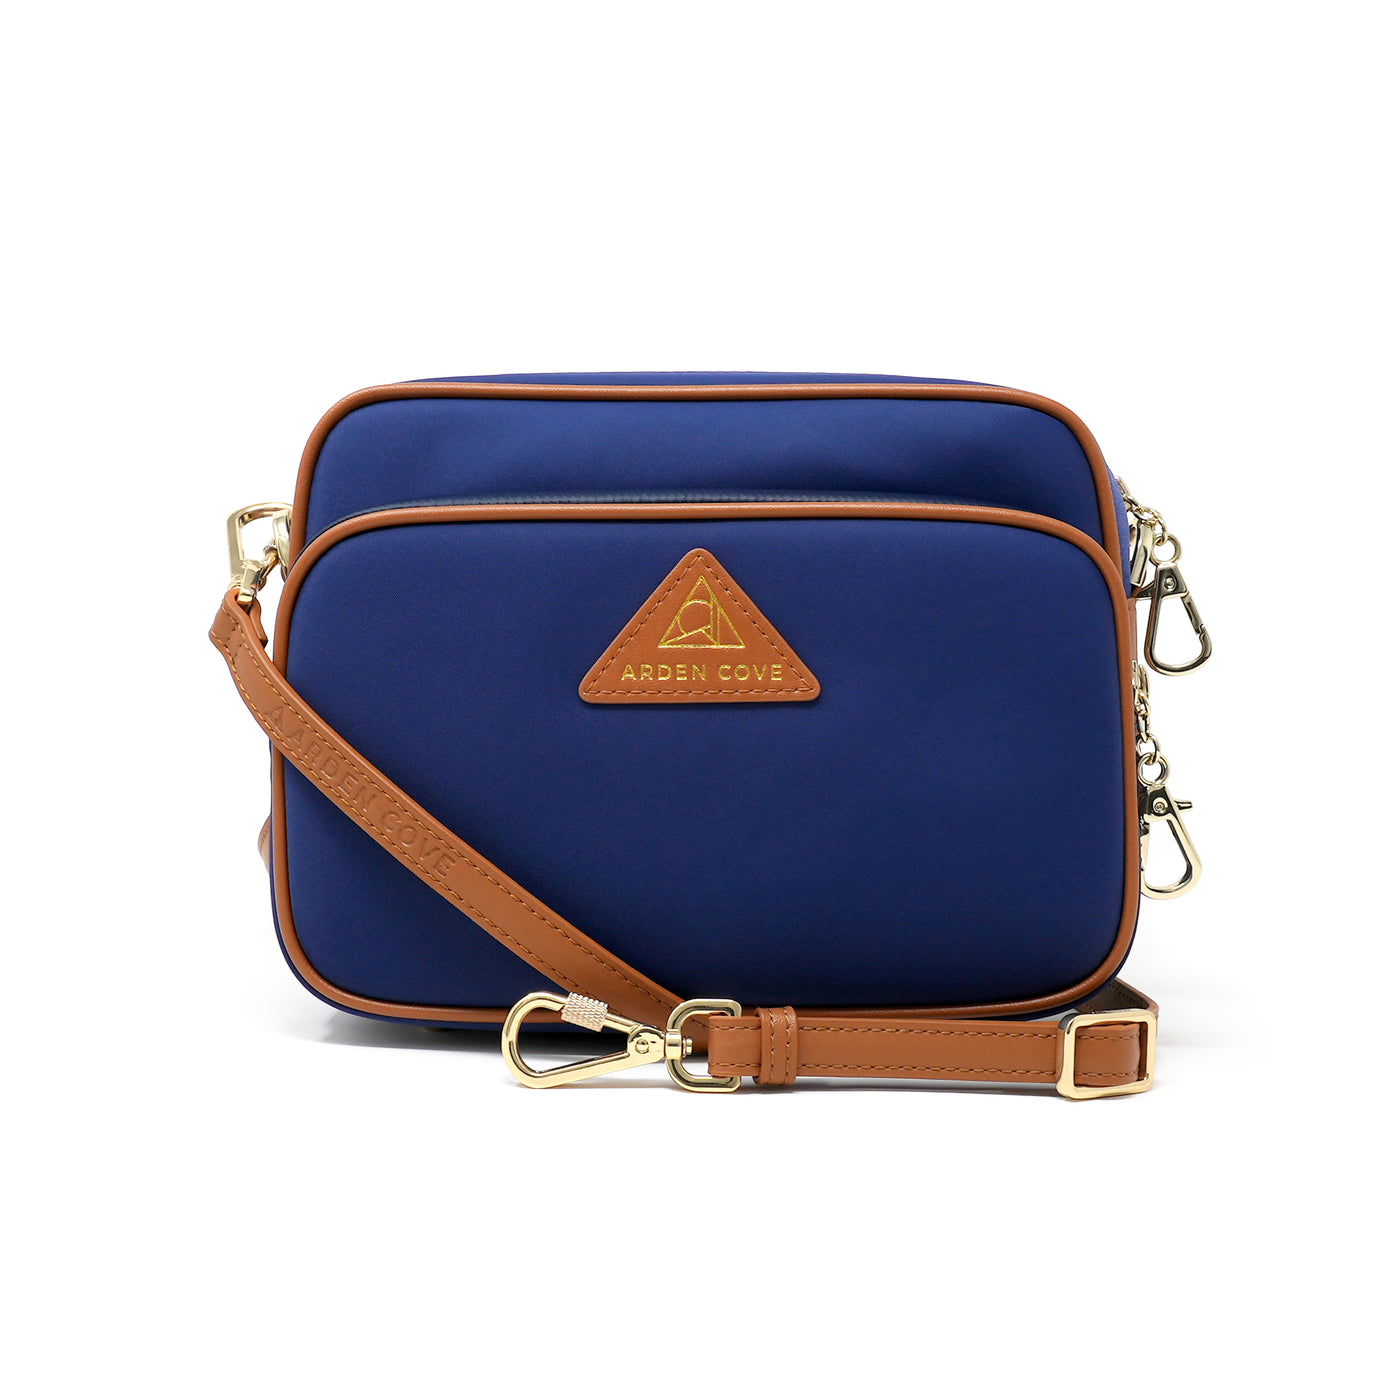 Anti-theft Water-resistant Travel Crossbody - Crissy Full Crossbody in Navy Gold with slash-resistant faux leather & locking clasps straps - front view - Arden Cove